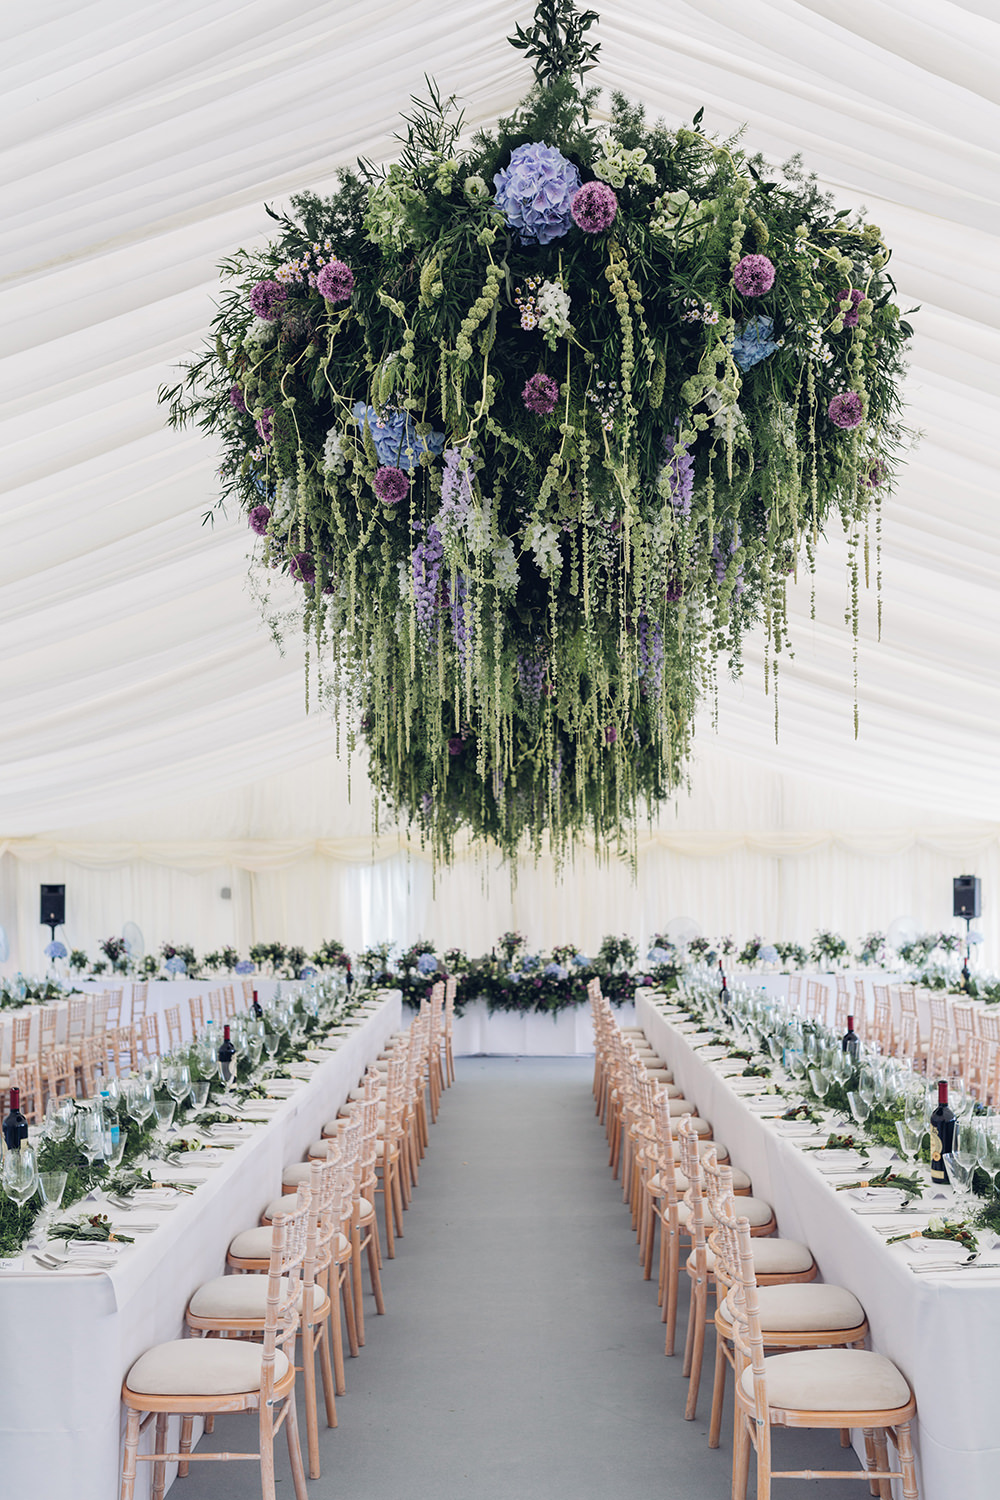 Look at this gorgeous woodland floral display, isn't it stunning